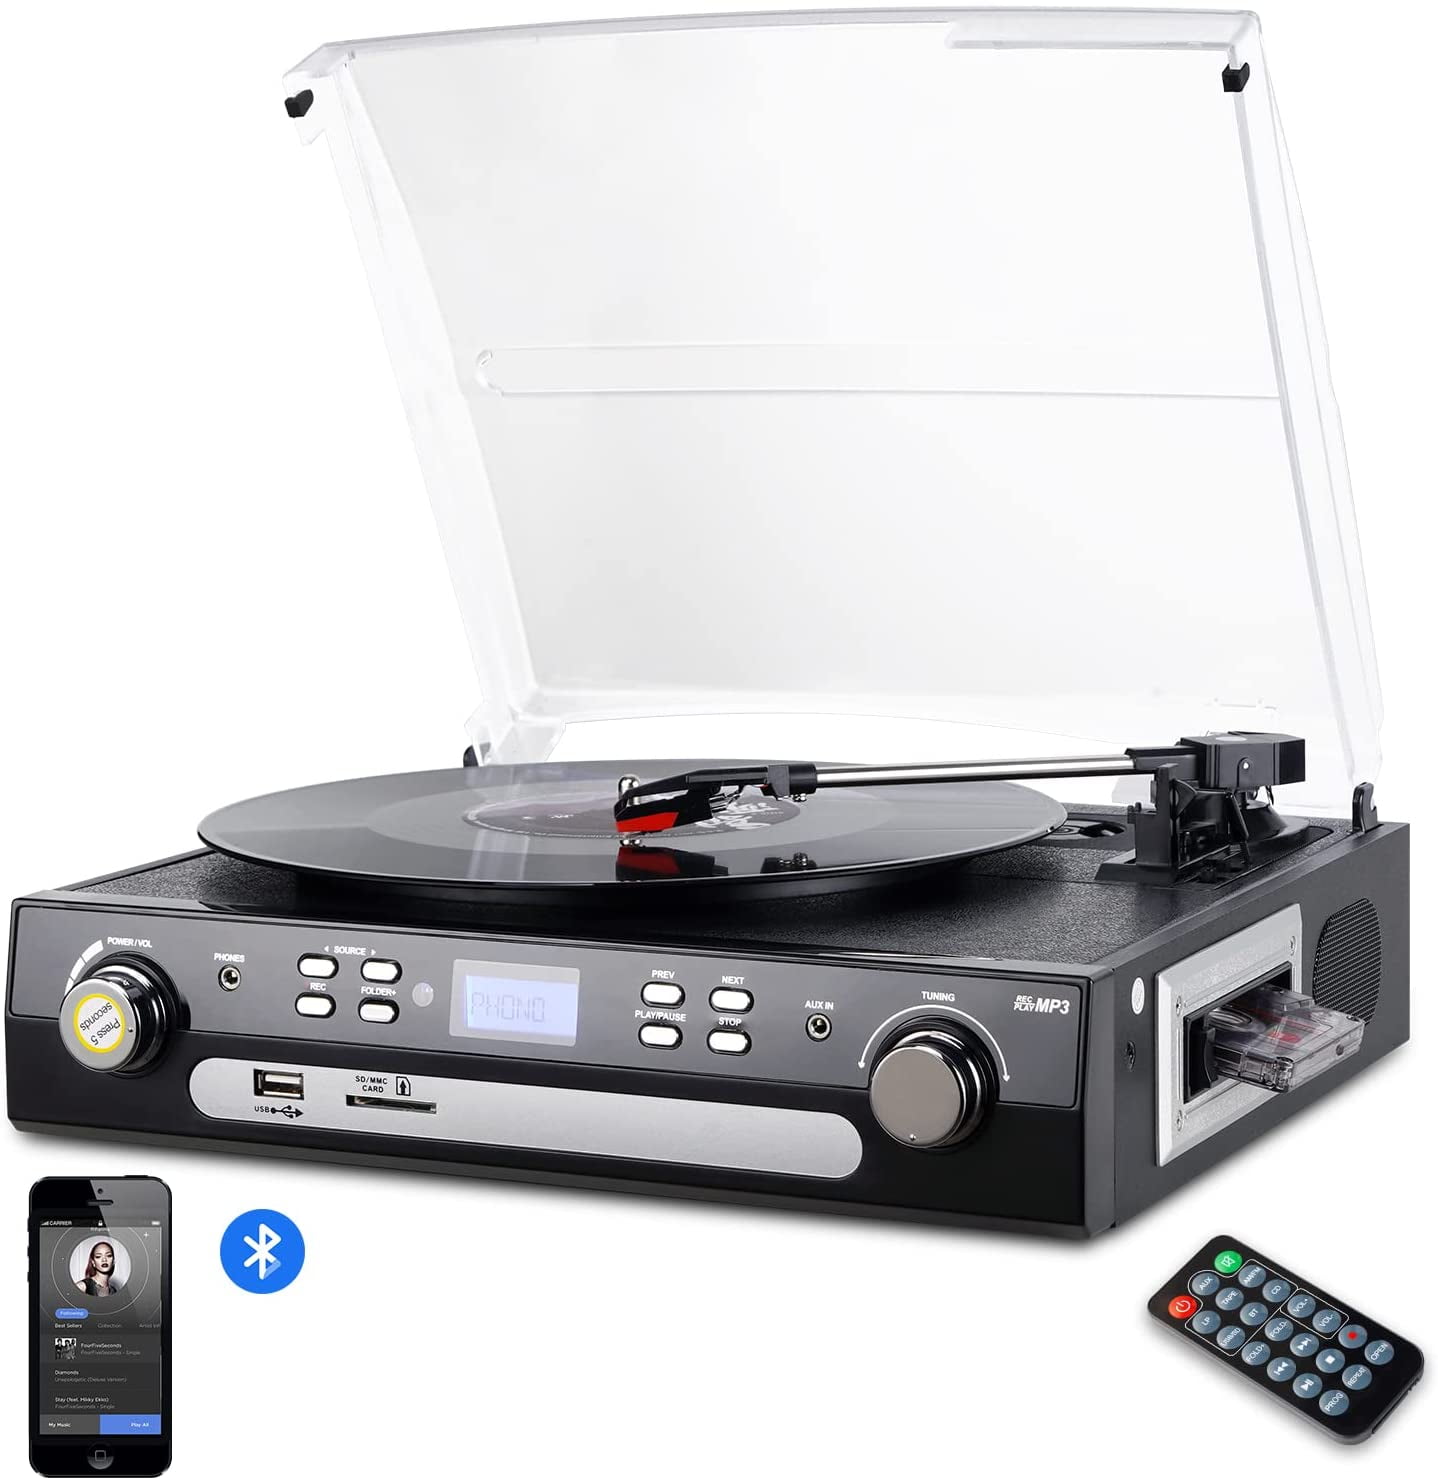 DIGITNOW Vinyl/LP Turntable Record Player, 3.5mm Headphone Jack,Remote and LCD with Bluetooth, AM&FM Radio, Cassette Tape, Aux in, USB/SD Encoding & Playing MP3/ Built-in Stereo Speakers